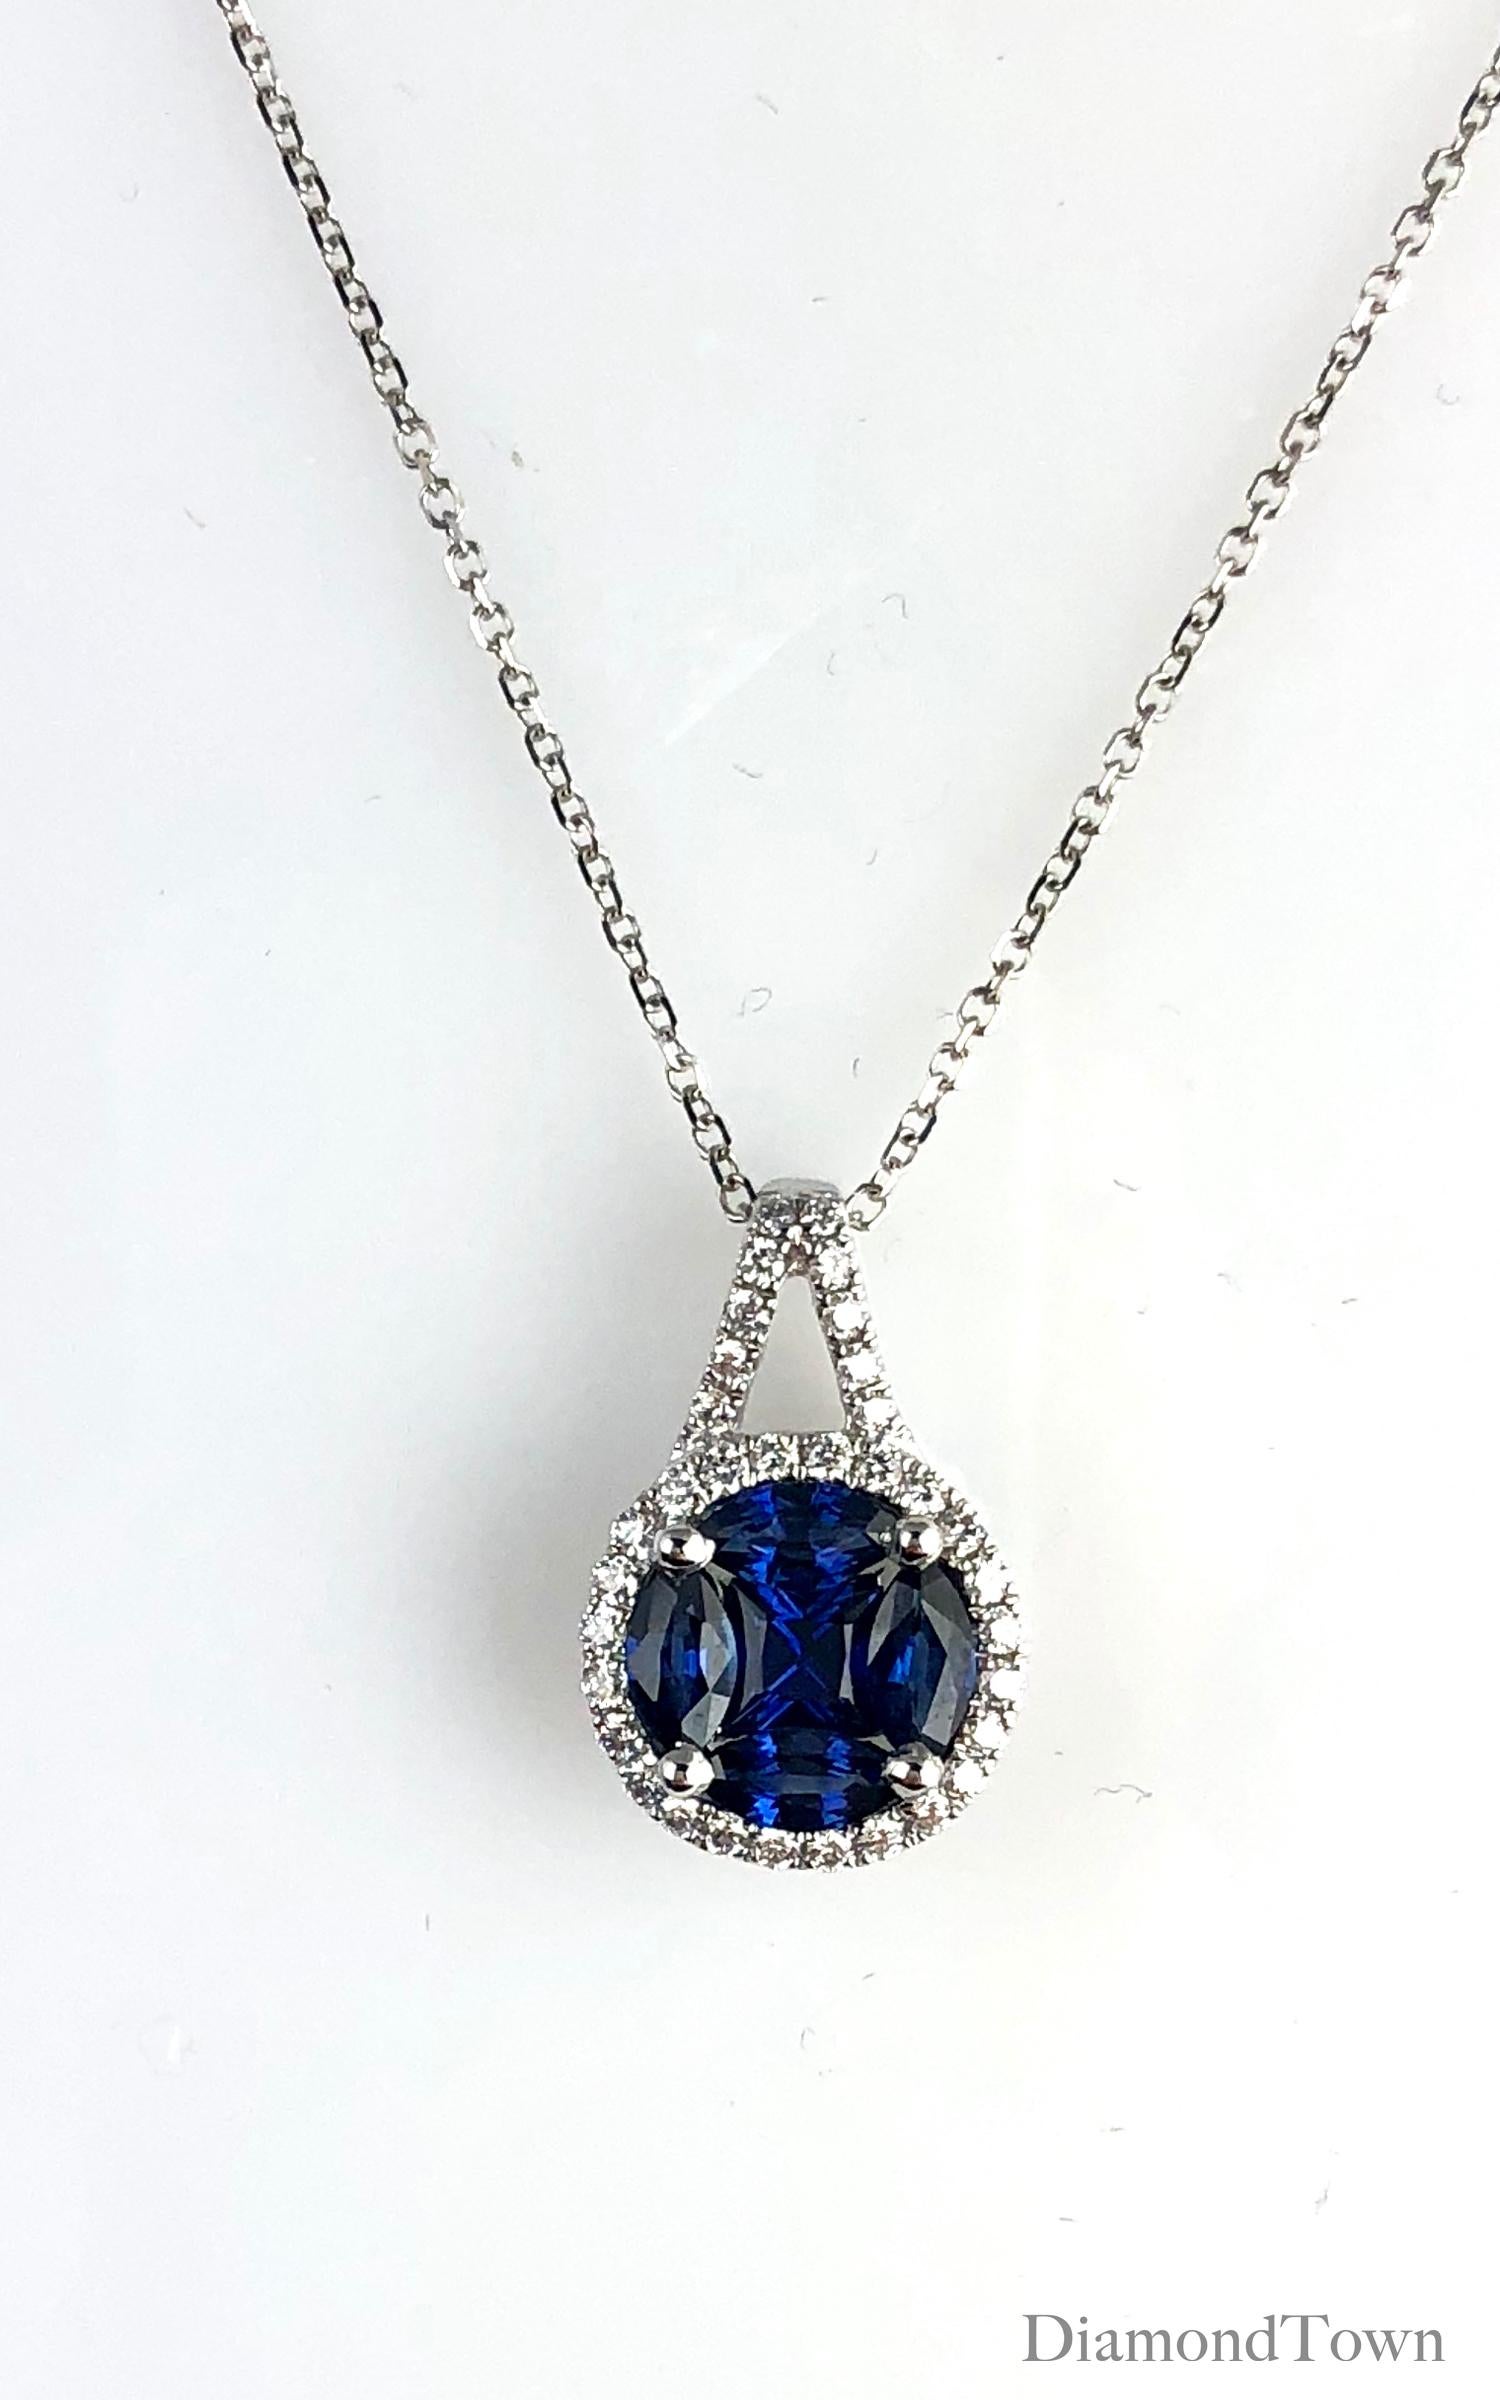 This pendant features a vivid blue sapphire cluster center (5 stones, total weight 0.80 carats) surrounded by a halo of round white diamonds, which also extend up the bail. Total diamond weight 0.19 carats.

Set in 18k White Gold

Matching earrings